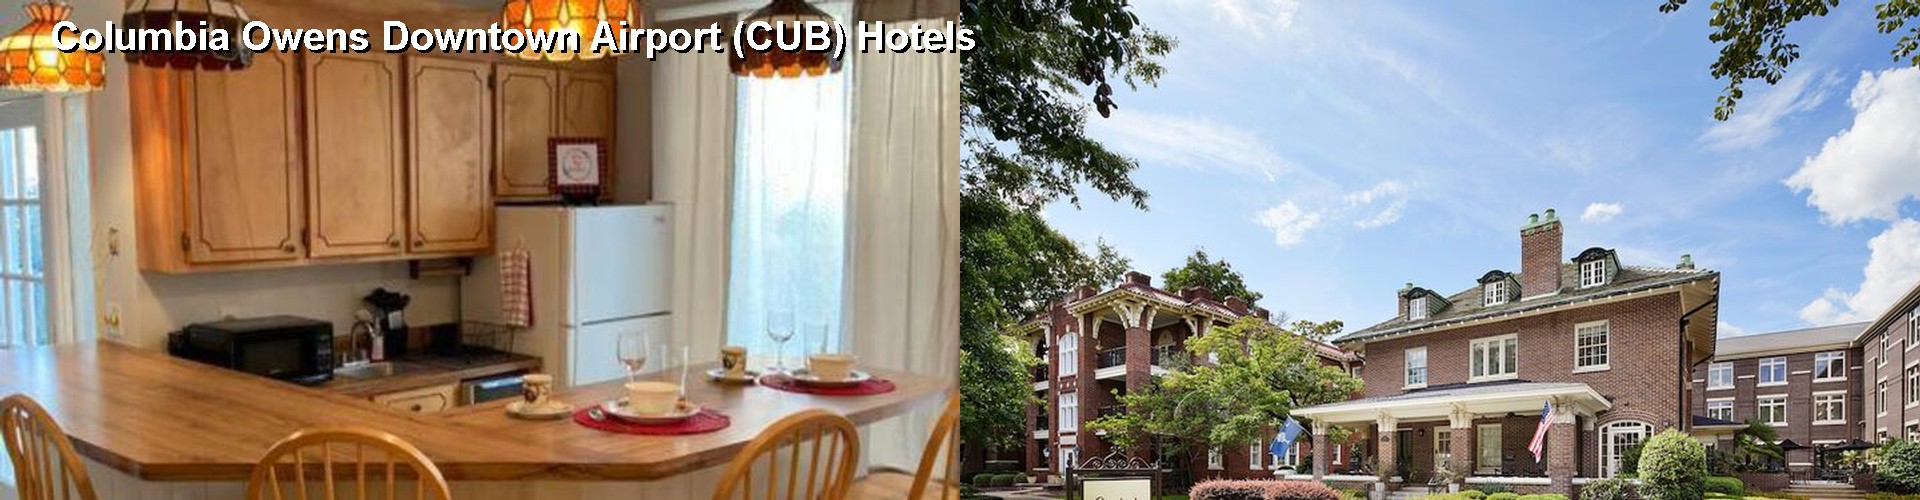 3 Best Hotels near Columbia Owens Downtown Airport (CUB)